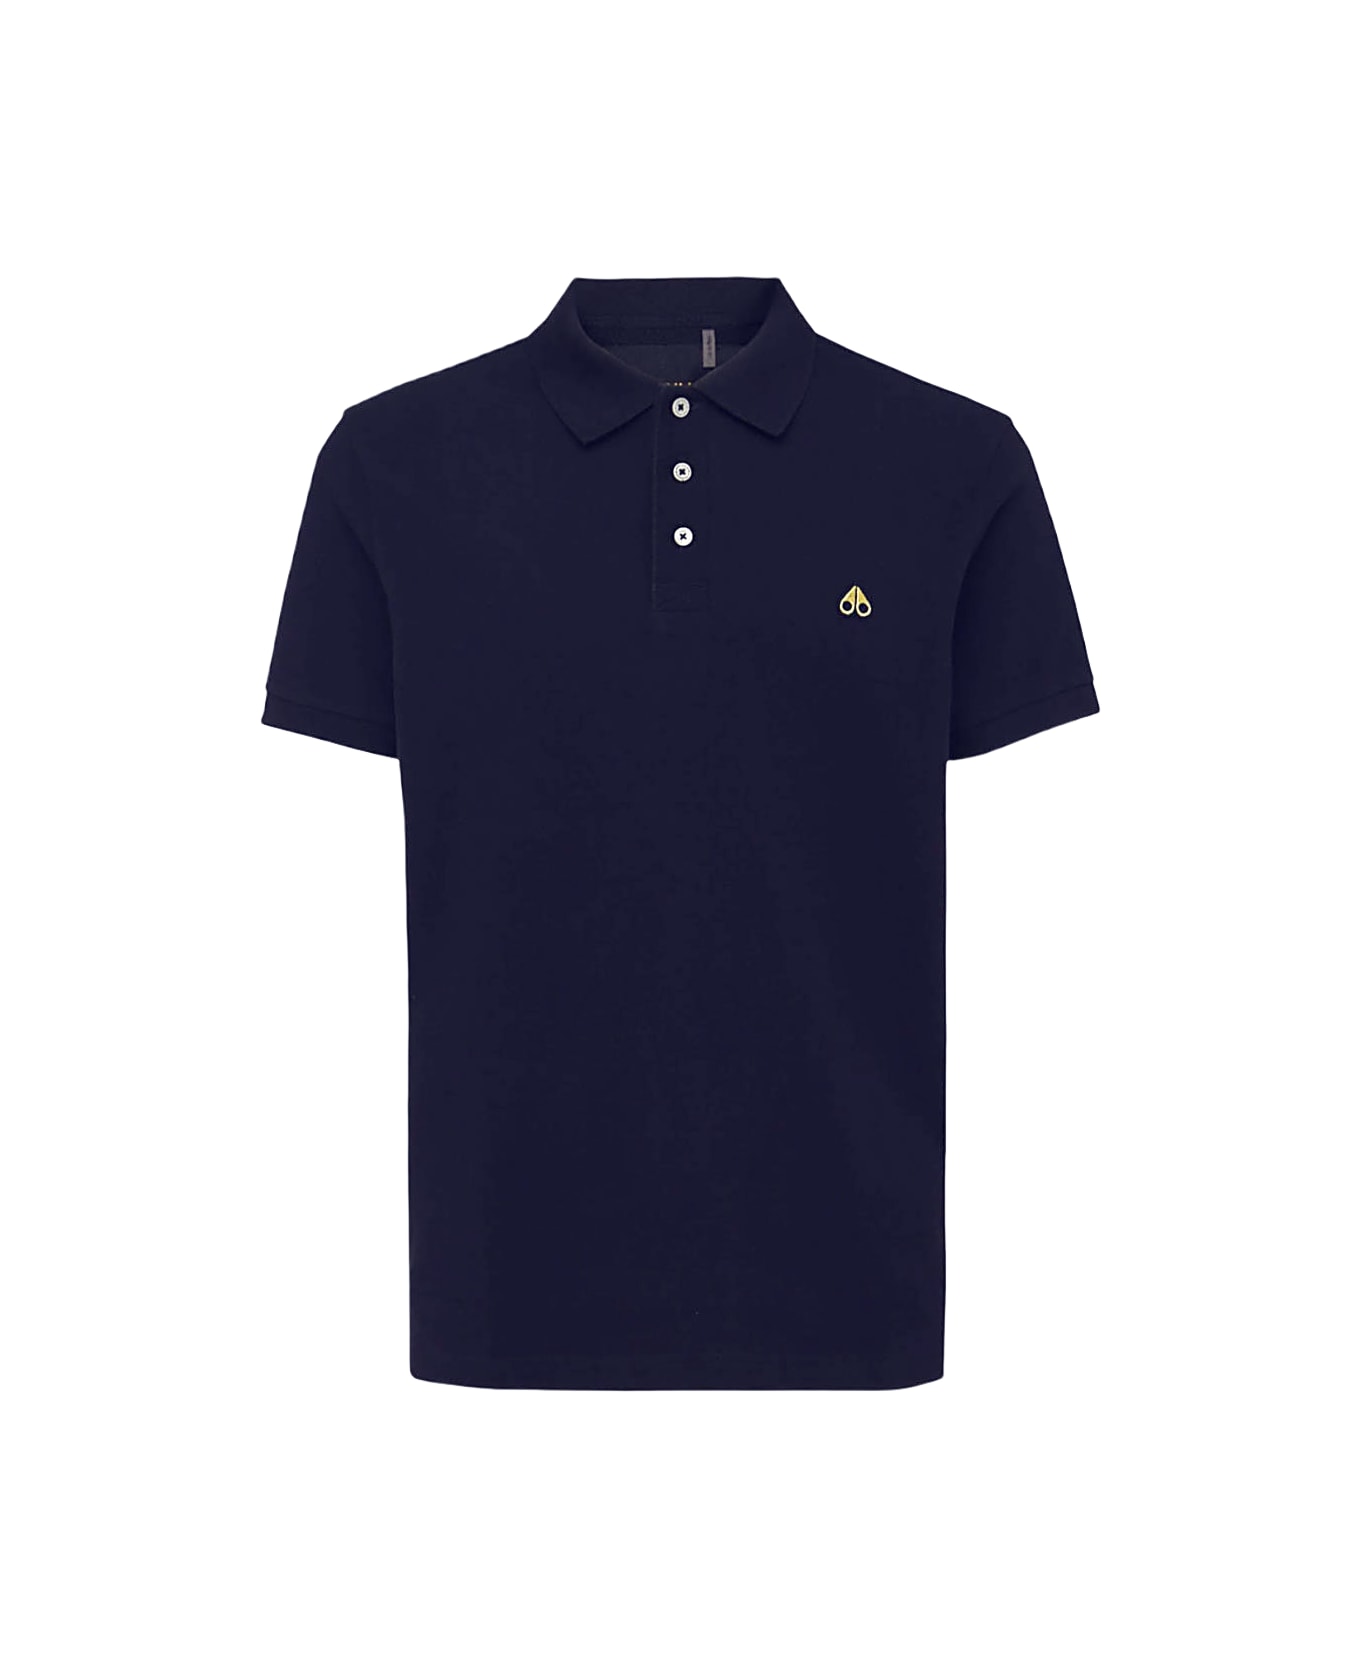 Moose Knuckles Navy Blue Cotton Polo Shirt - Blue ポロシャツ